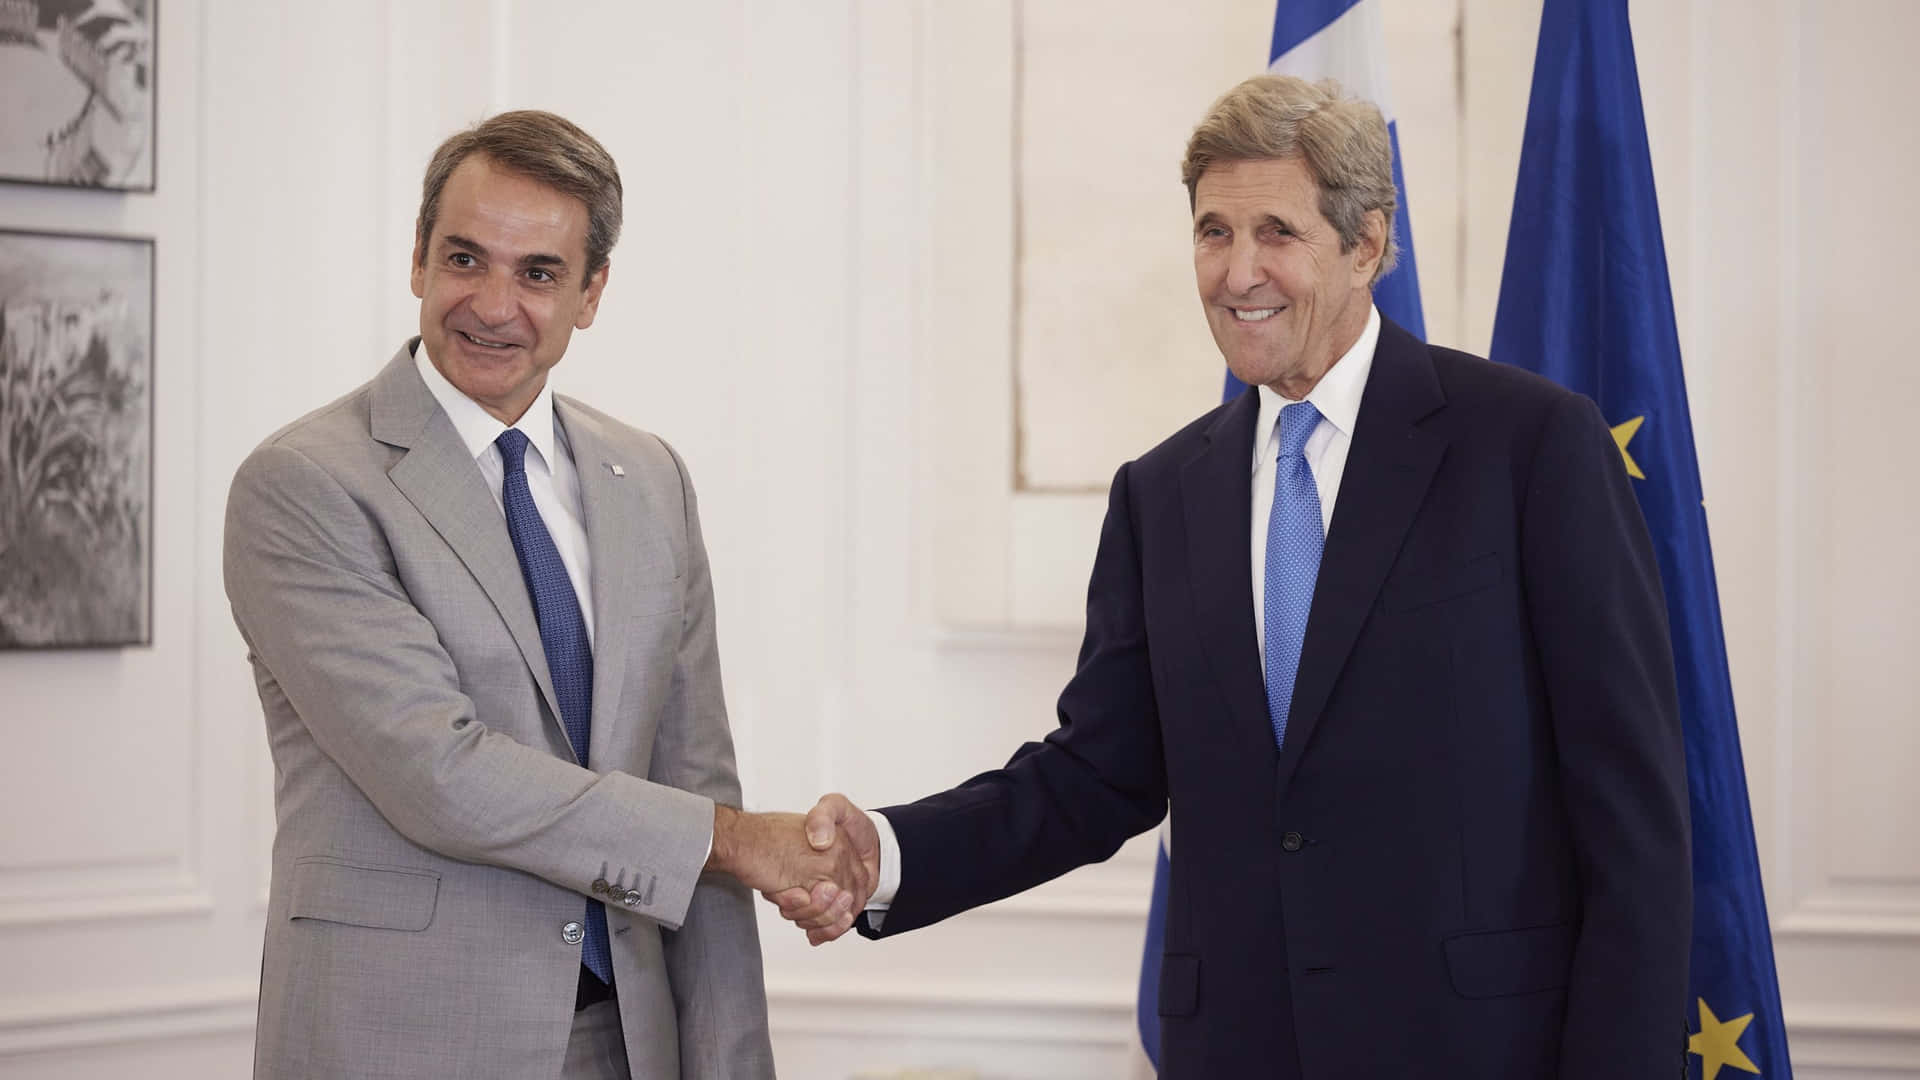 John Kerry Meets With Greek Prime Minister Wallpaper